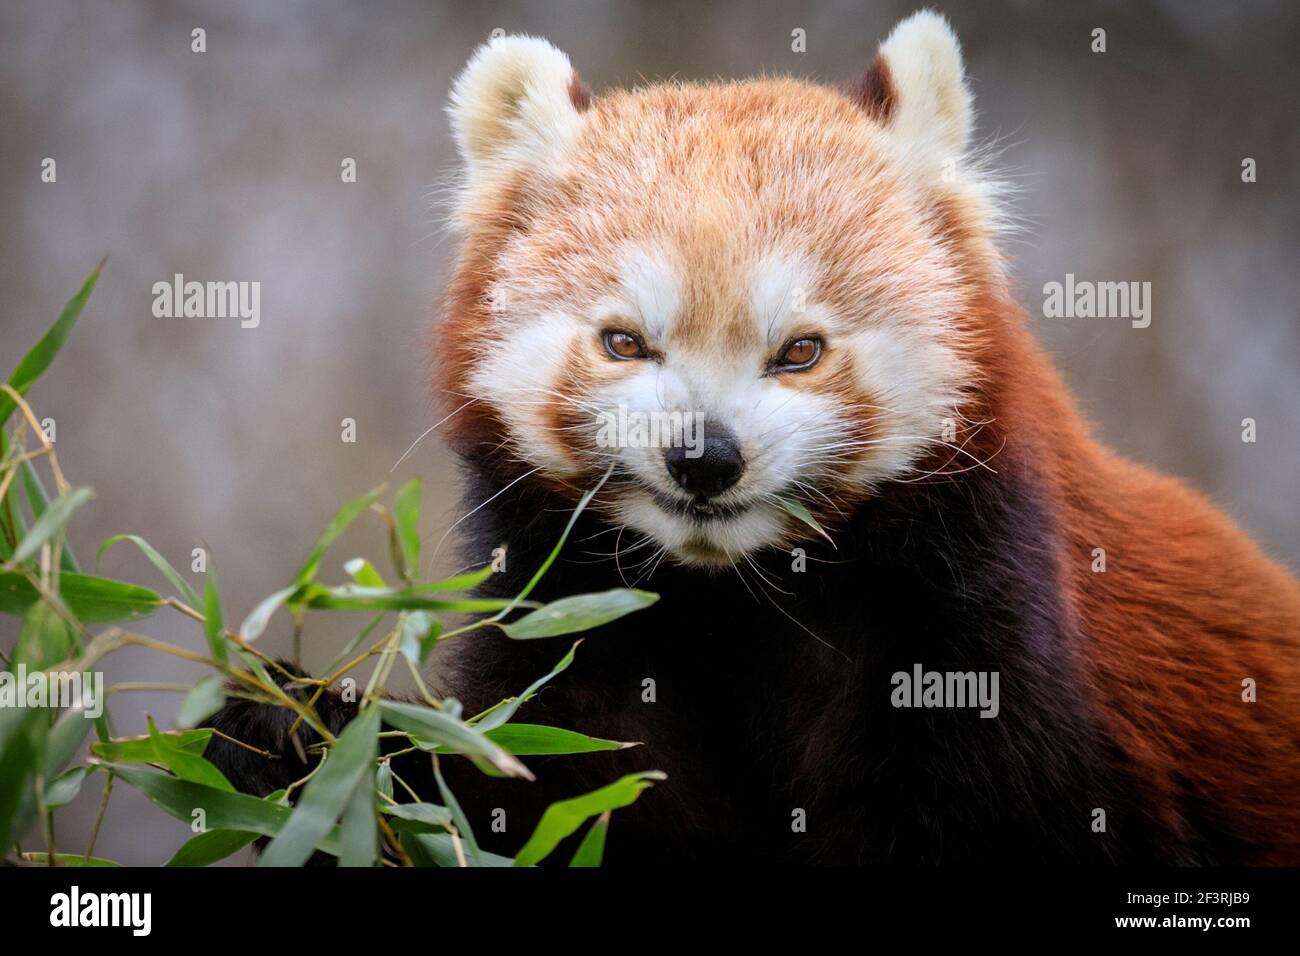 A Happy Looking Red Panda Ailurus Fulgens An Endangered Species Native Eastern Himalayas And Southwestern China Munches On Bamboo Close Up Face Stock Photo Alamy